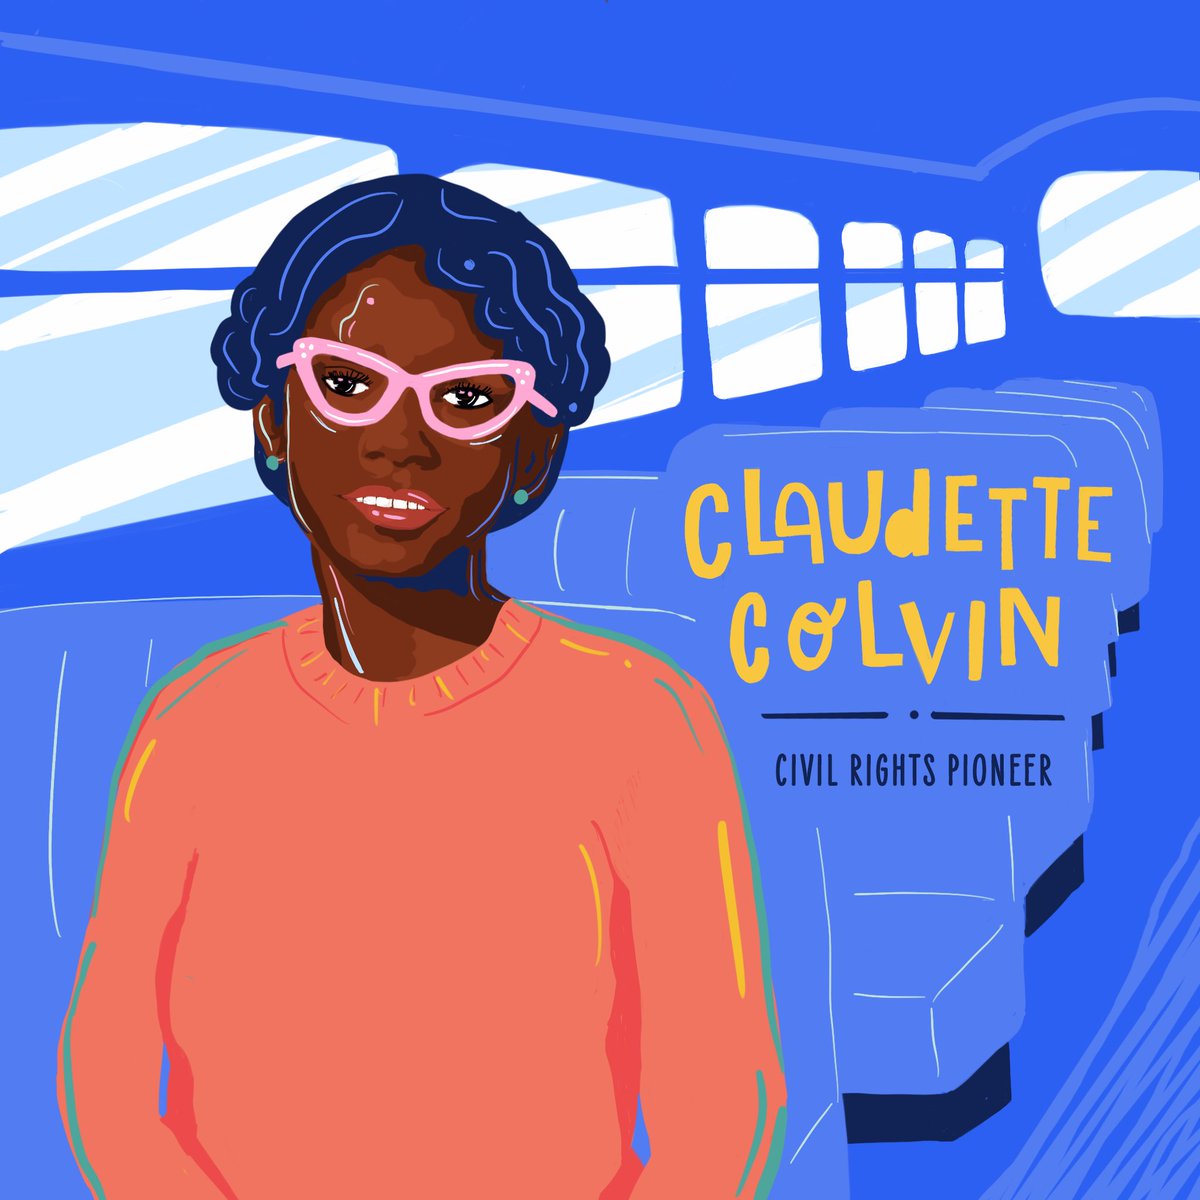 @CNN Thank you @CNN and @abbydphillip #ClaudetteColvin is finally getting the recognition she deserves. I drew this because she deserves to go down in history #legend